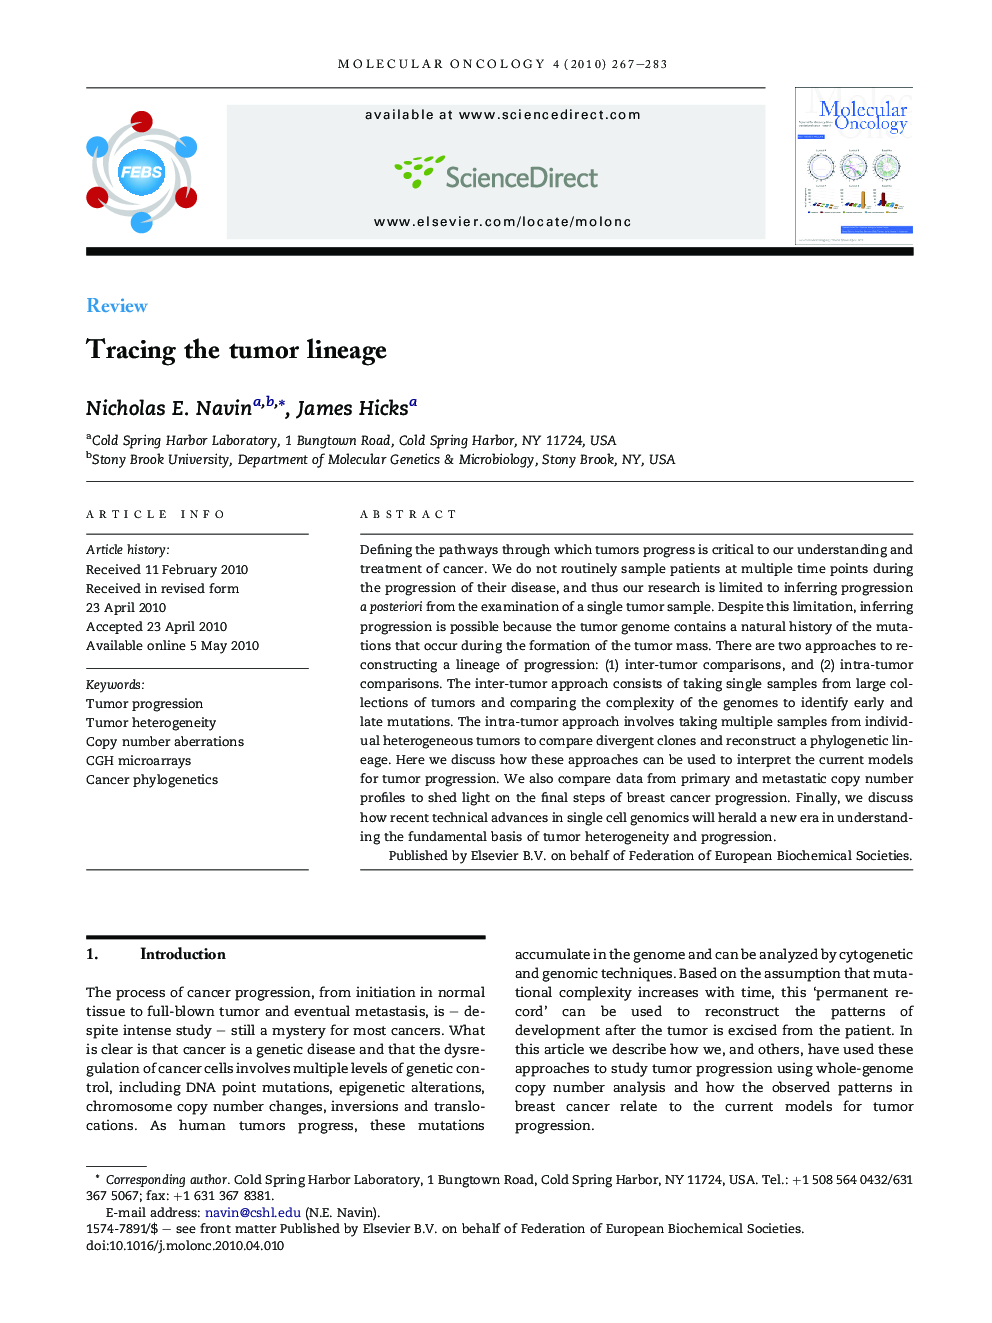 Tracing the tumor lineage